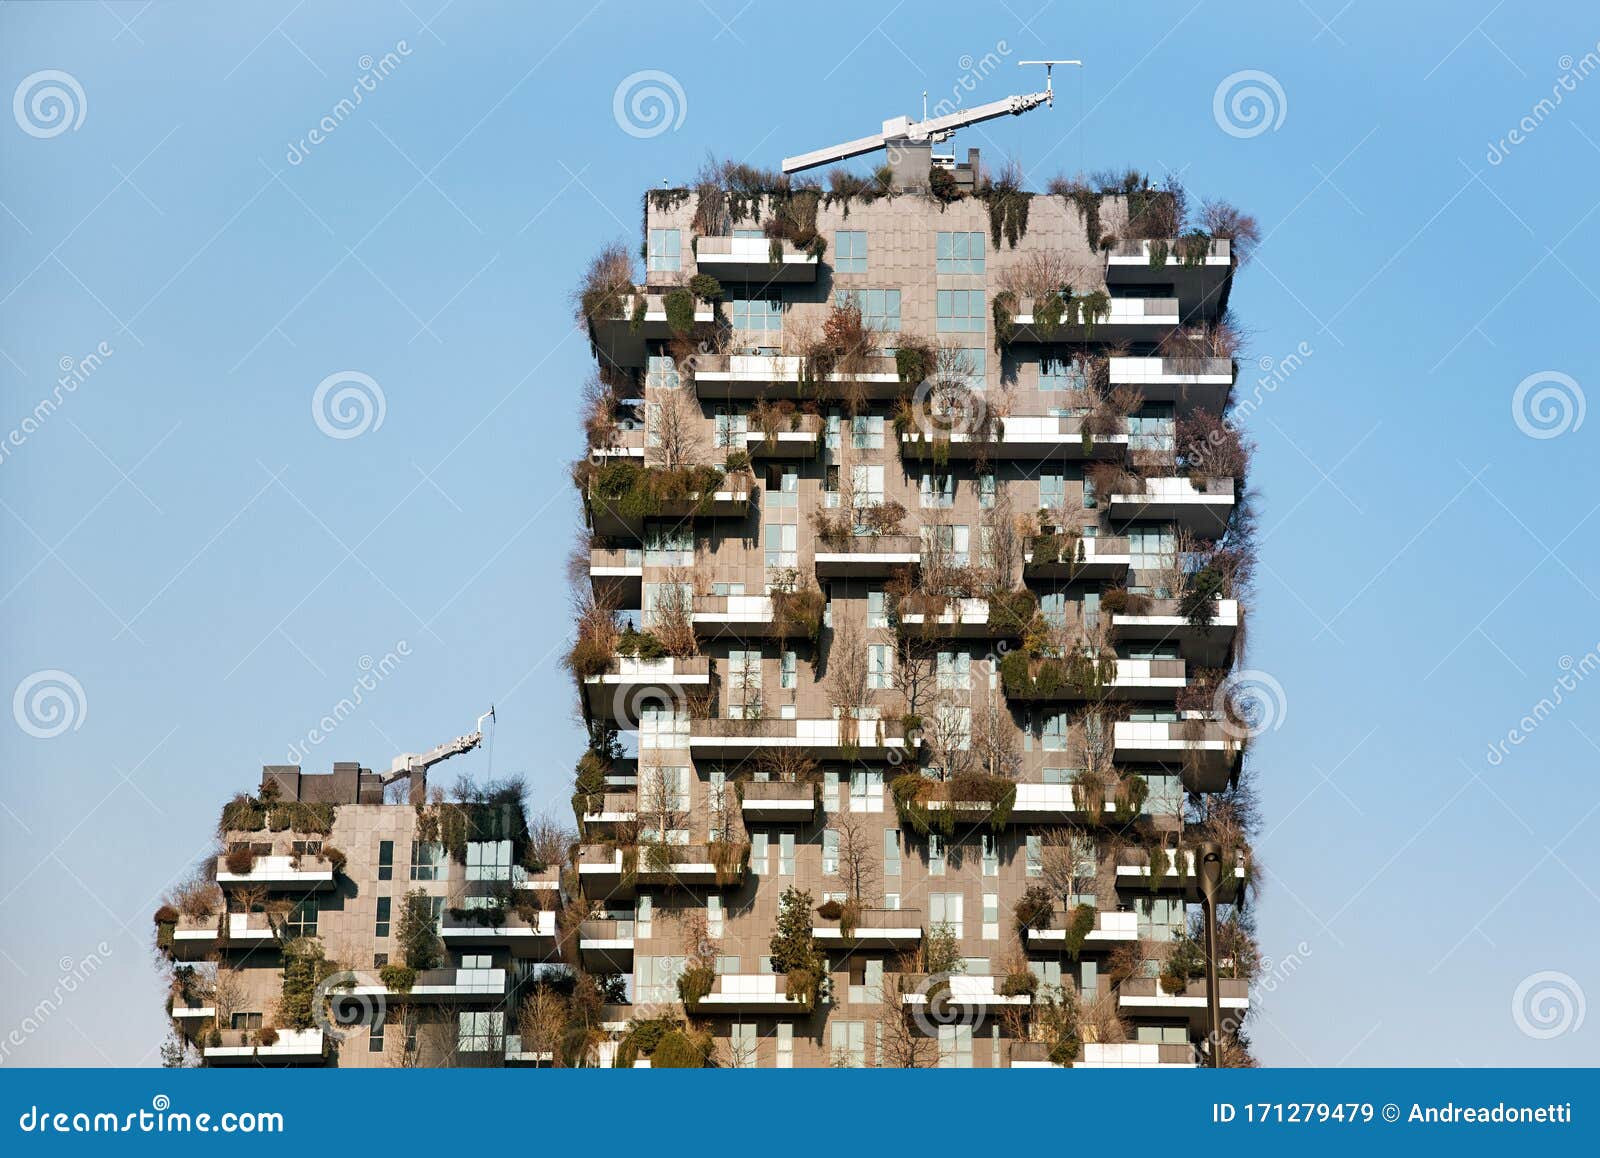 the bosco verticale towers in winter